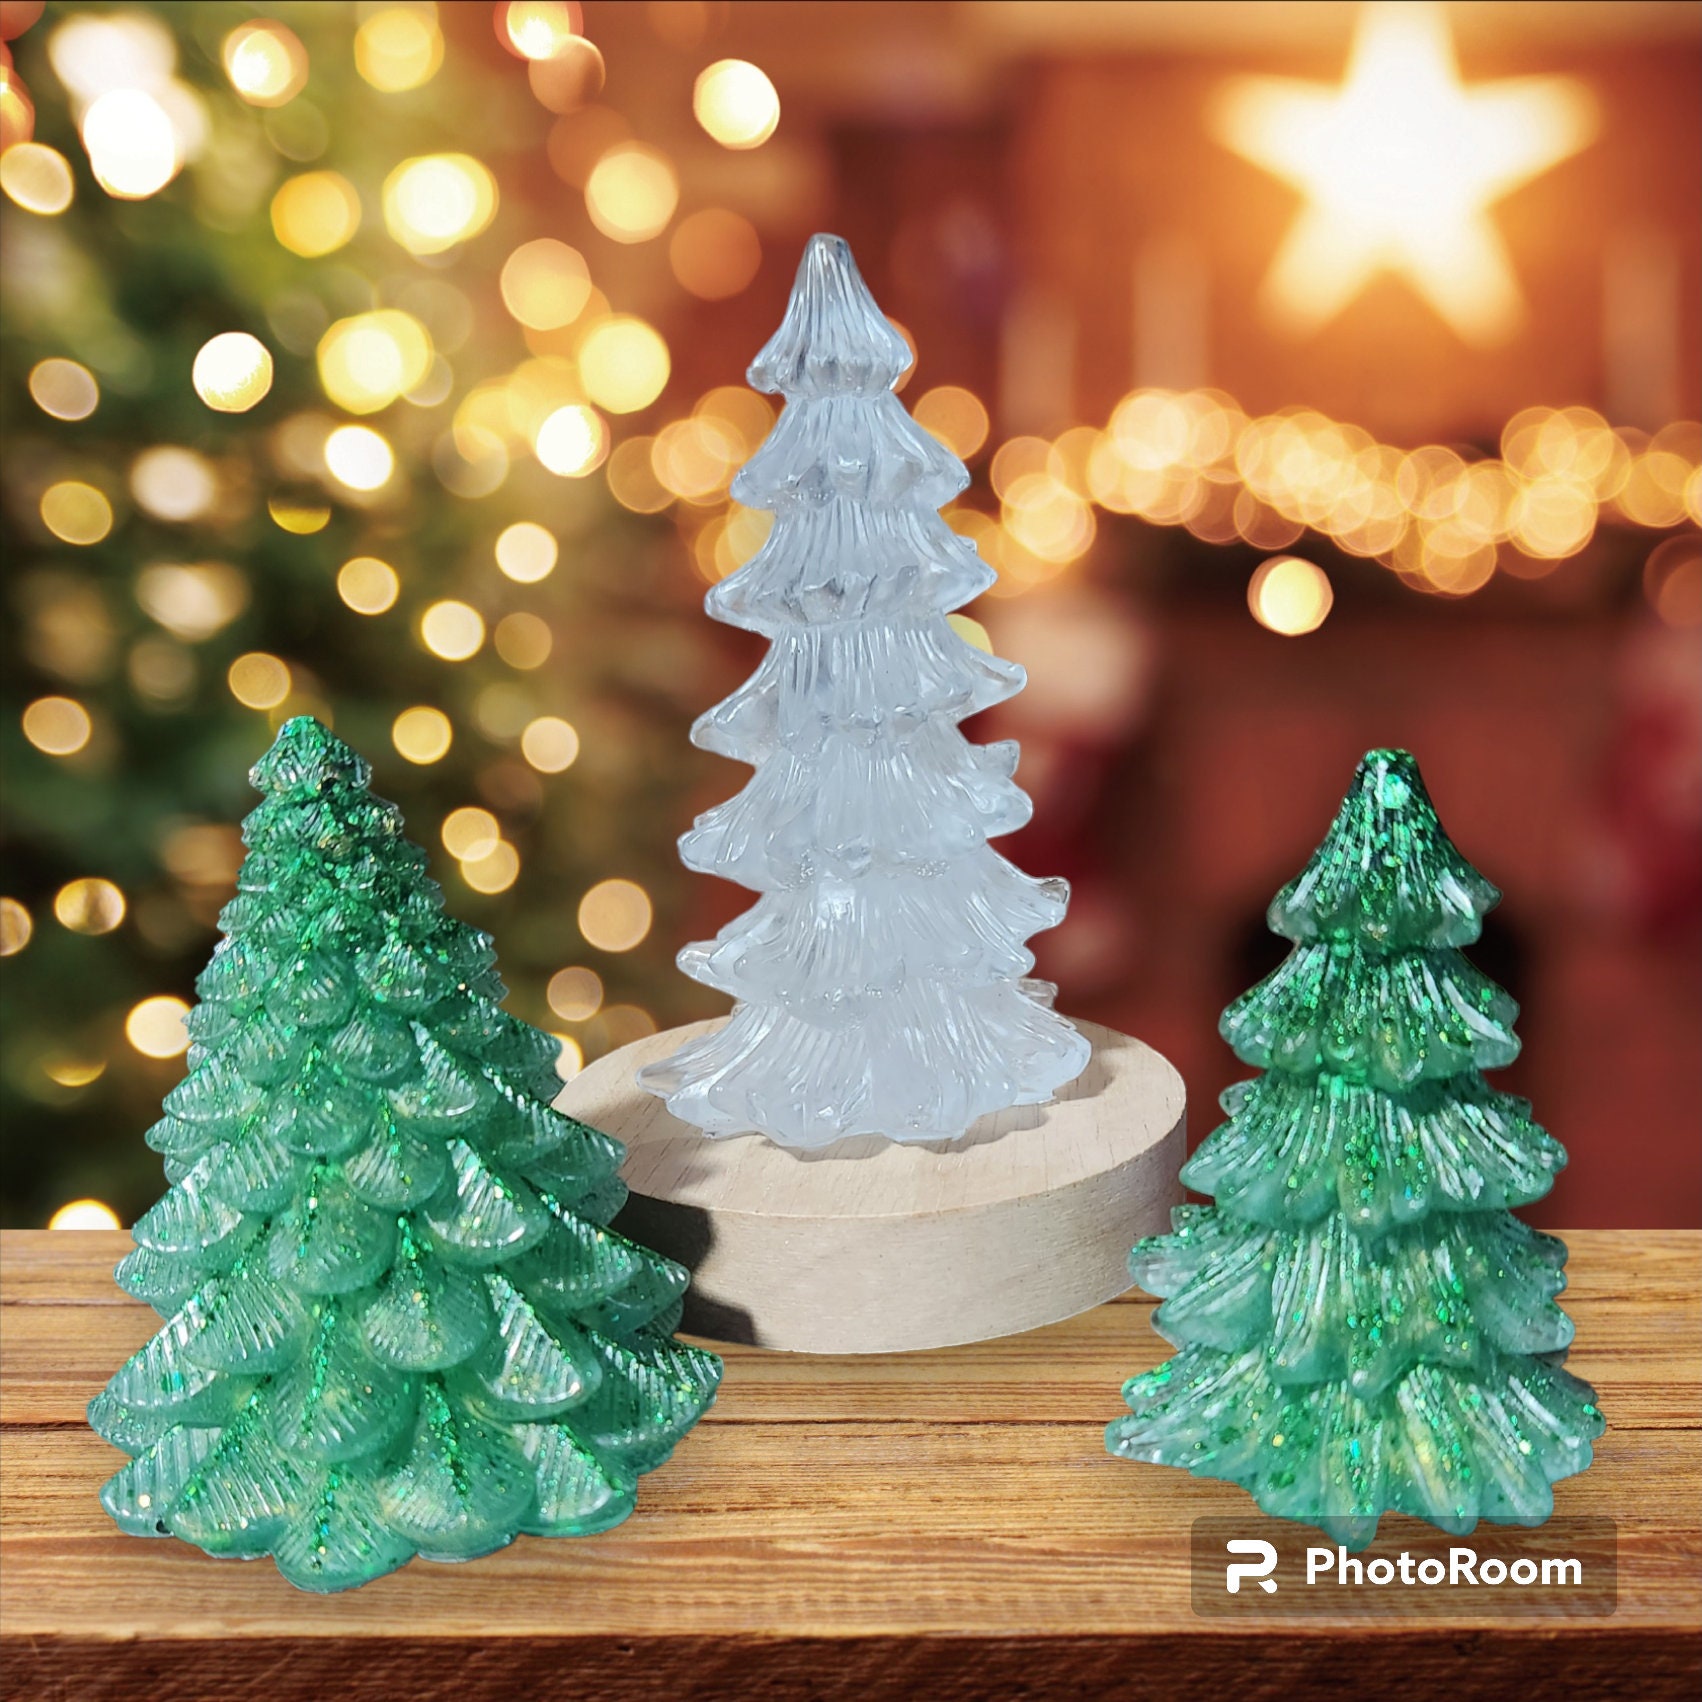 Set of 3 Glitter Trees with Colour Changing LED Lights